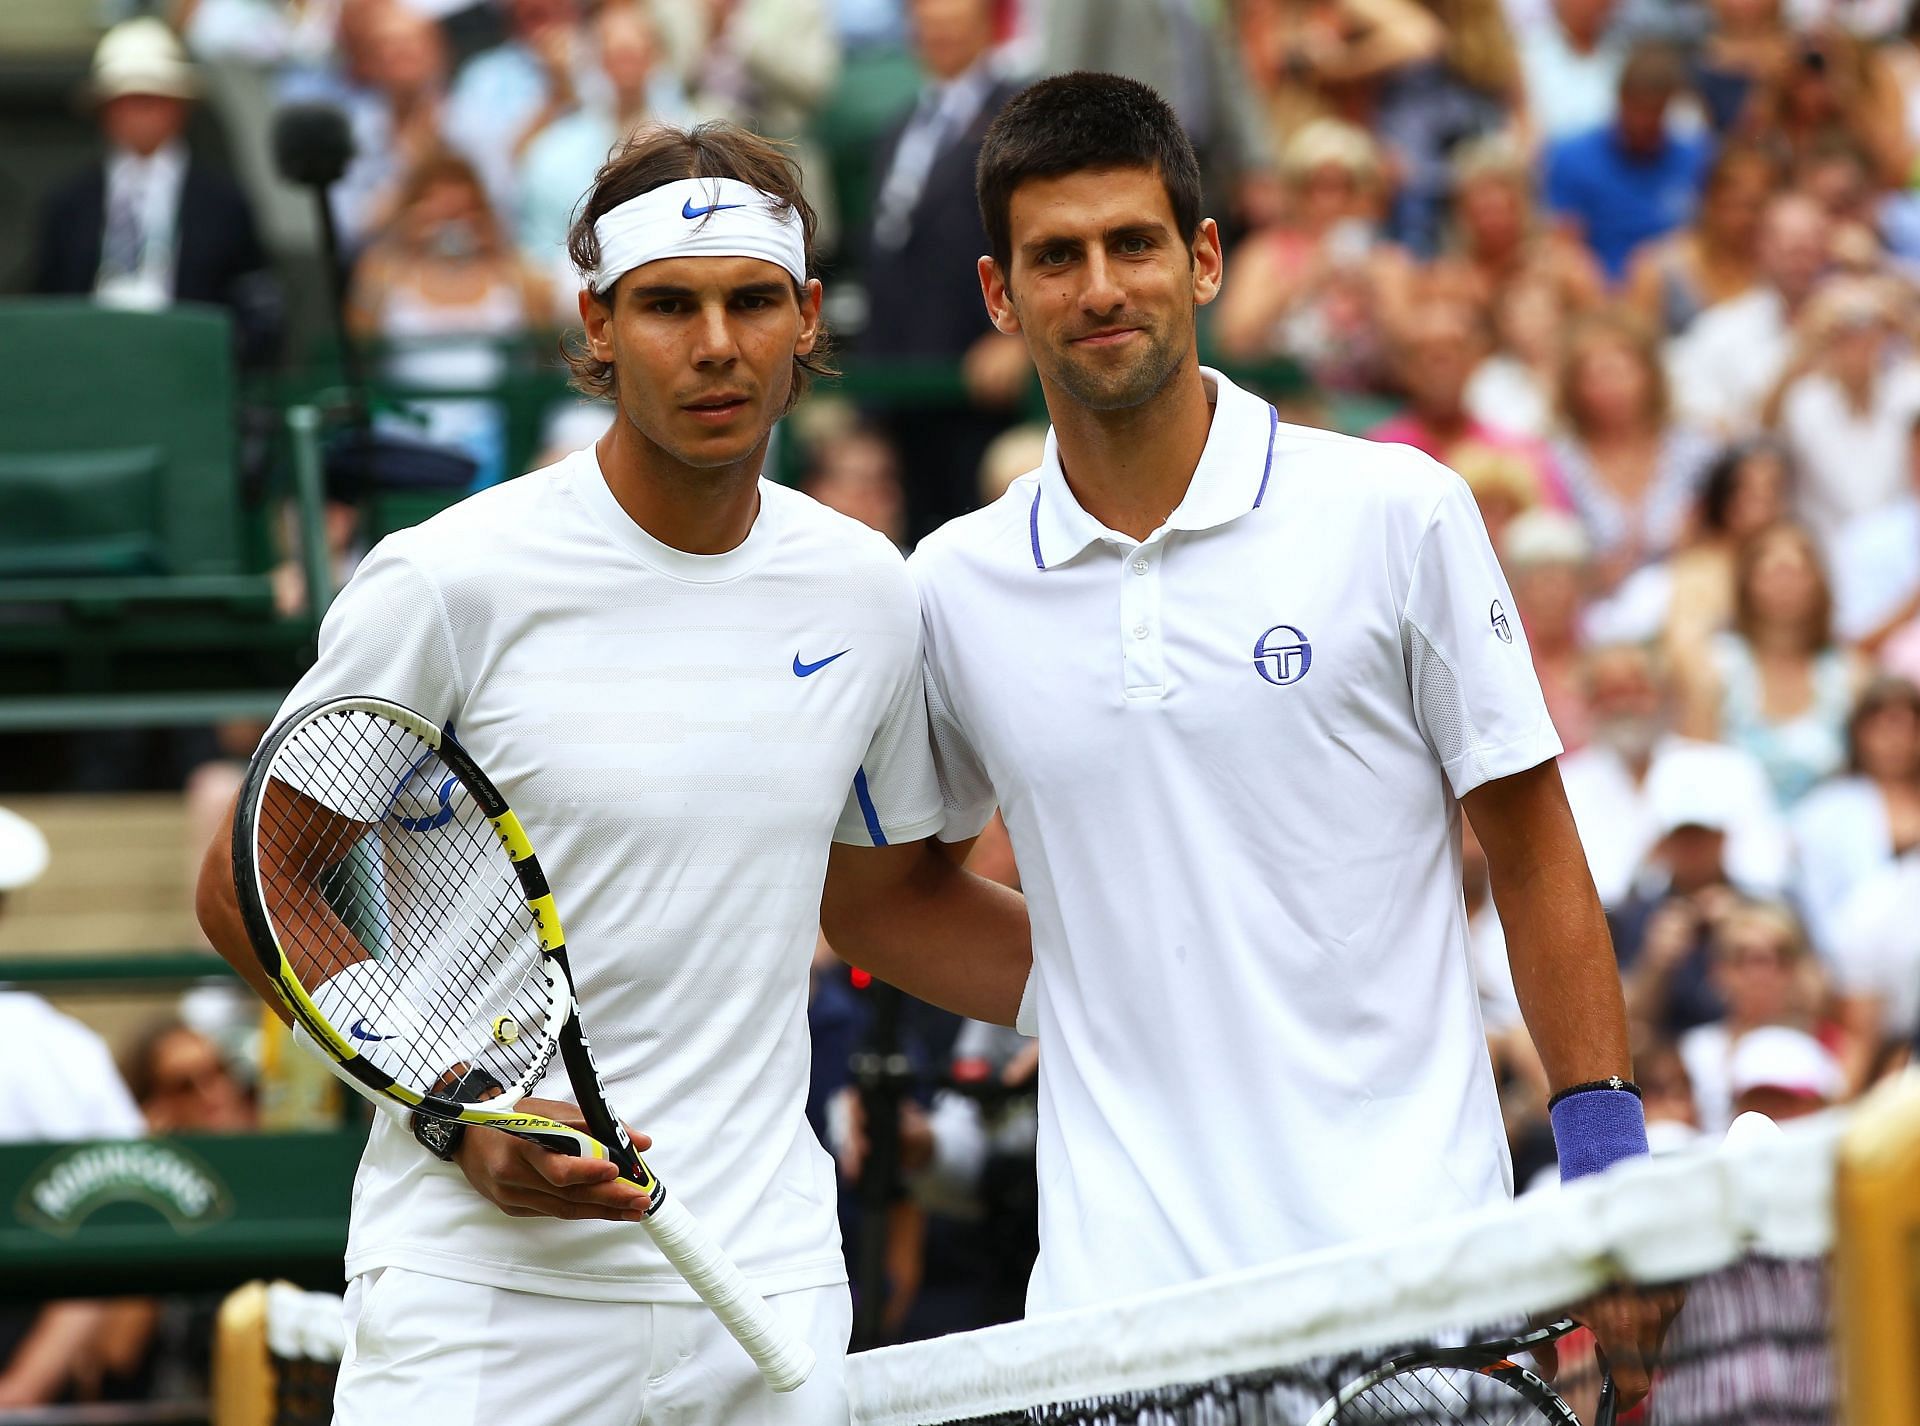 Novak Djokovic and Rafael Nadal are both on the entry list for the Australian Open this year